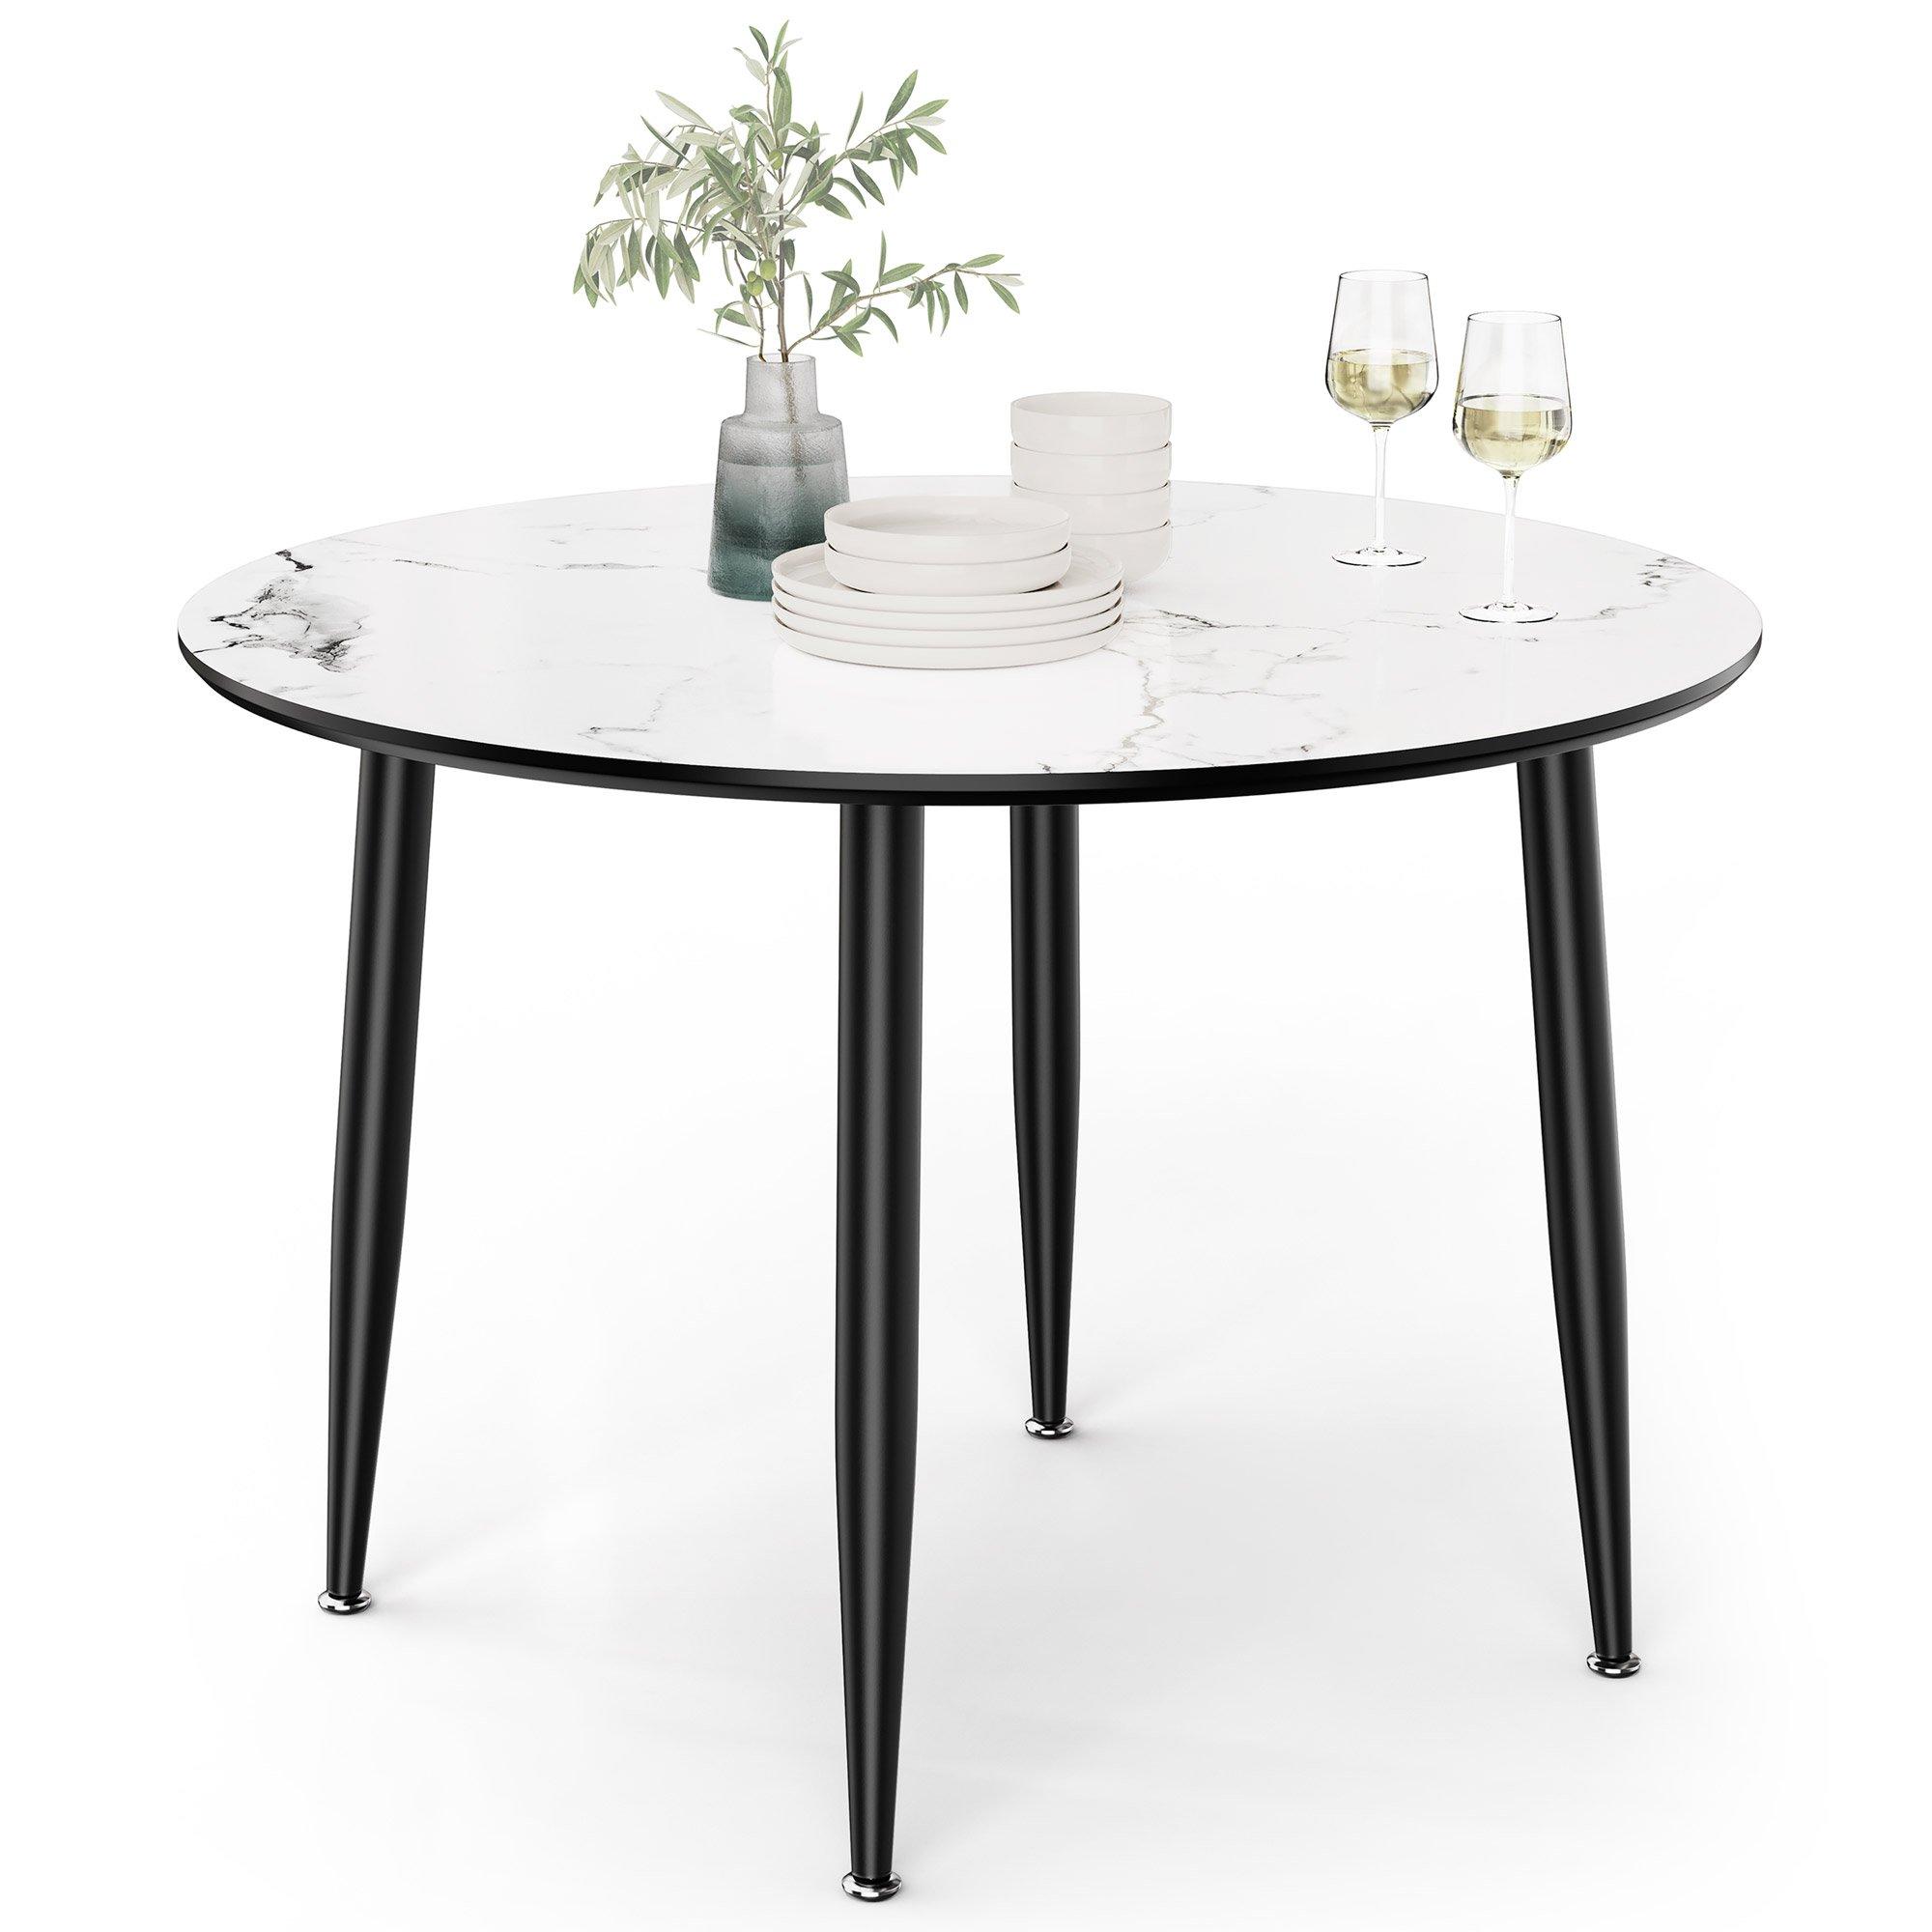 Parma Round 4 Seater Dining Table